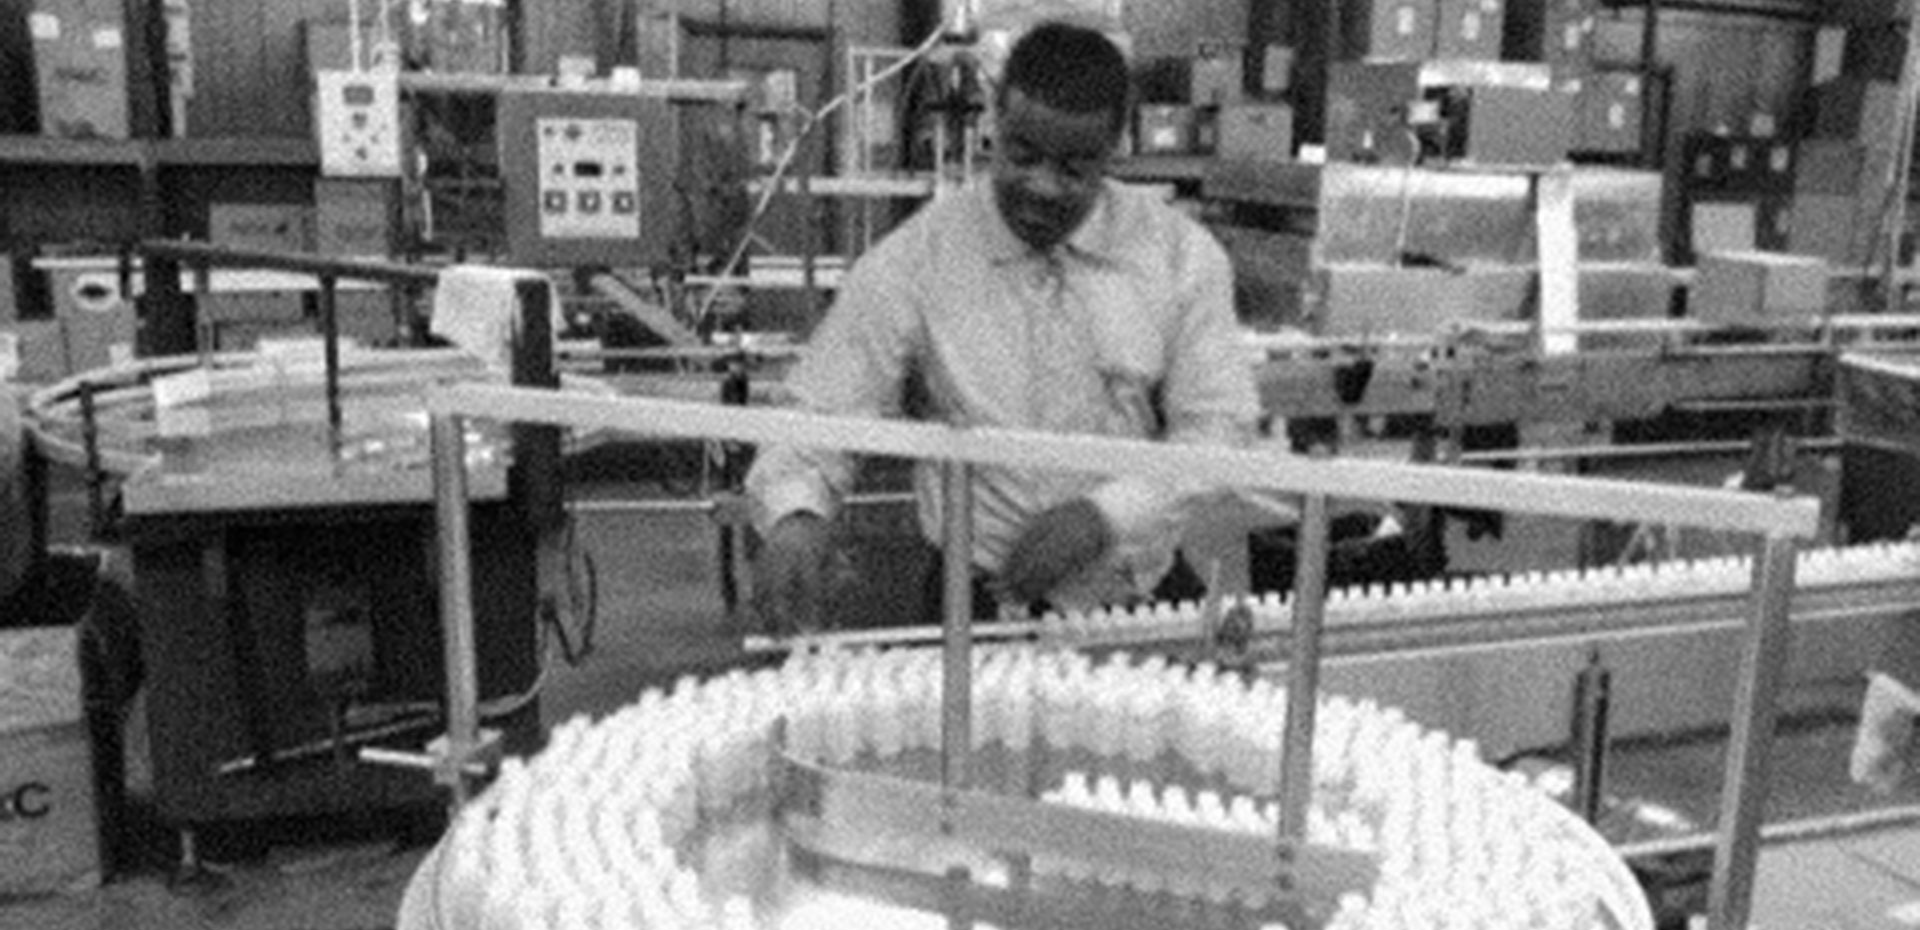 black and white photo of an African American man working in a factory